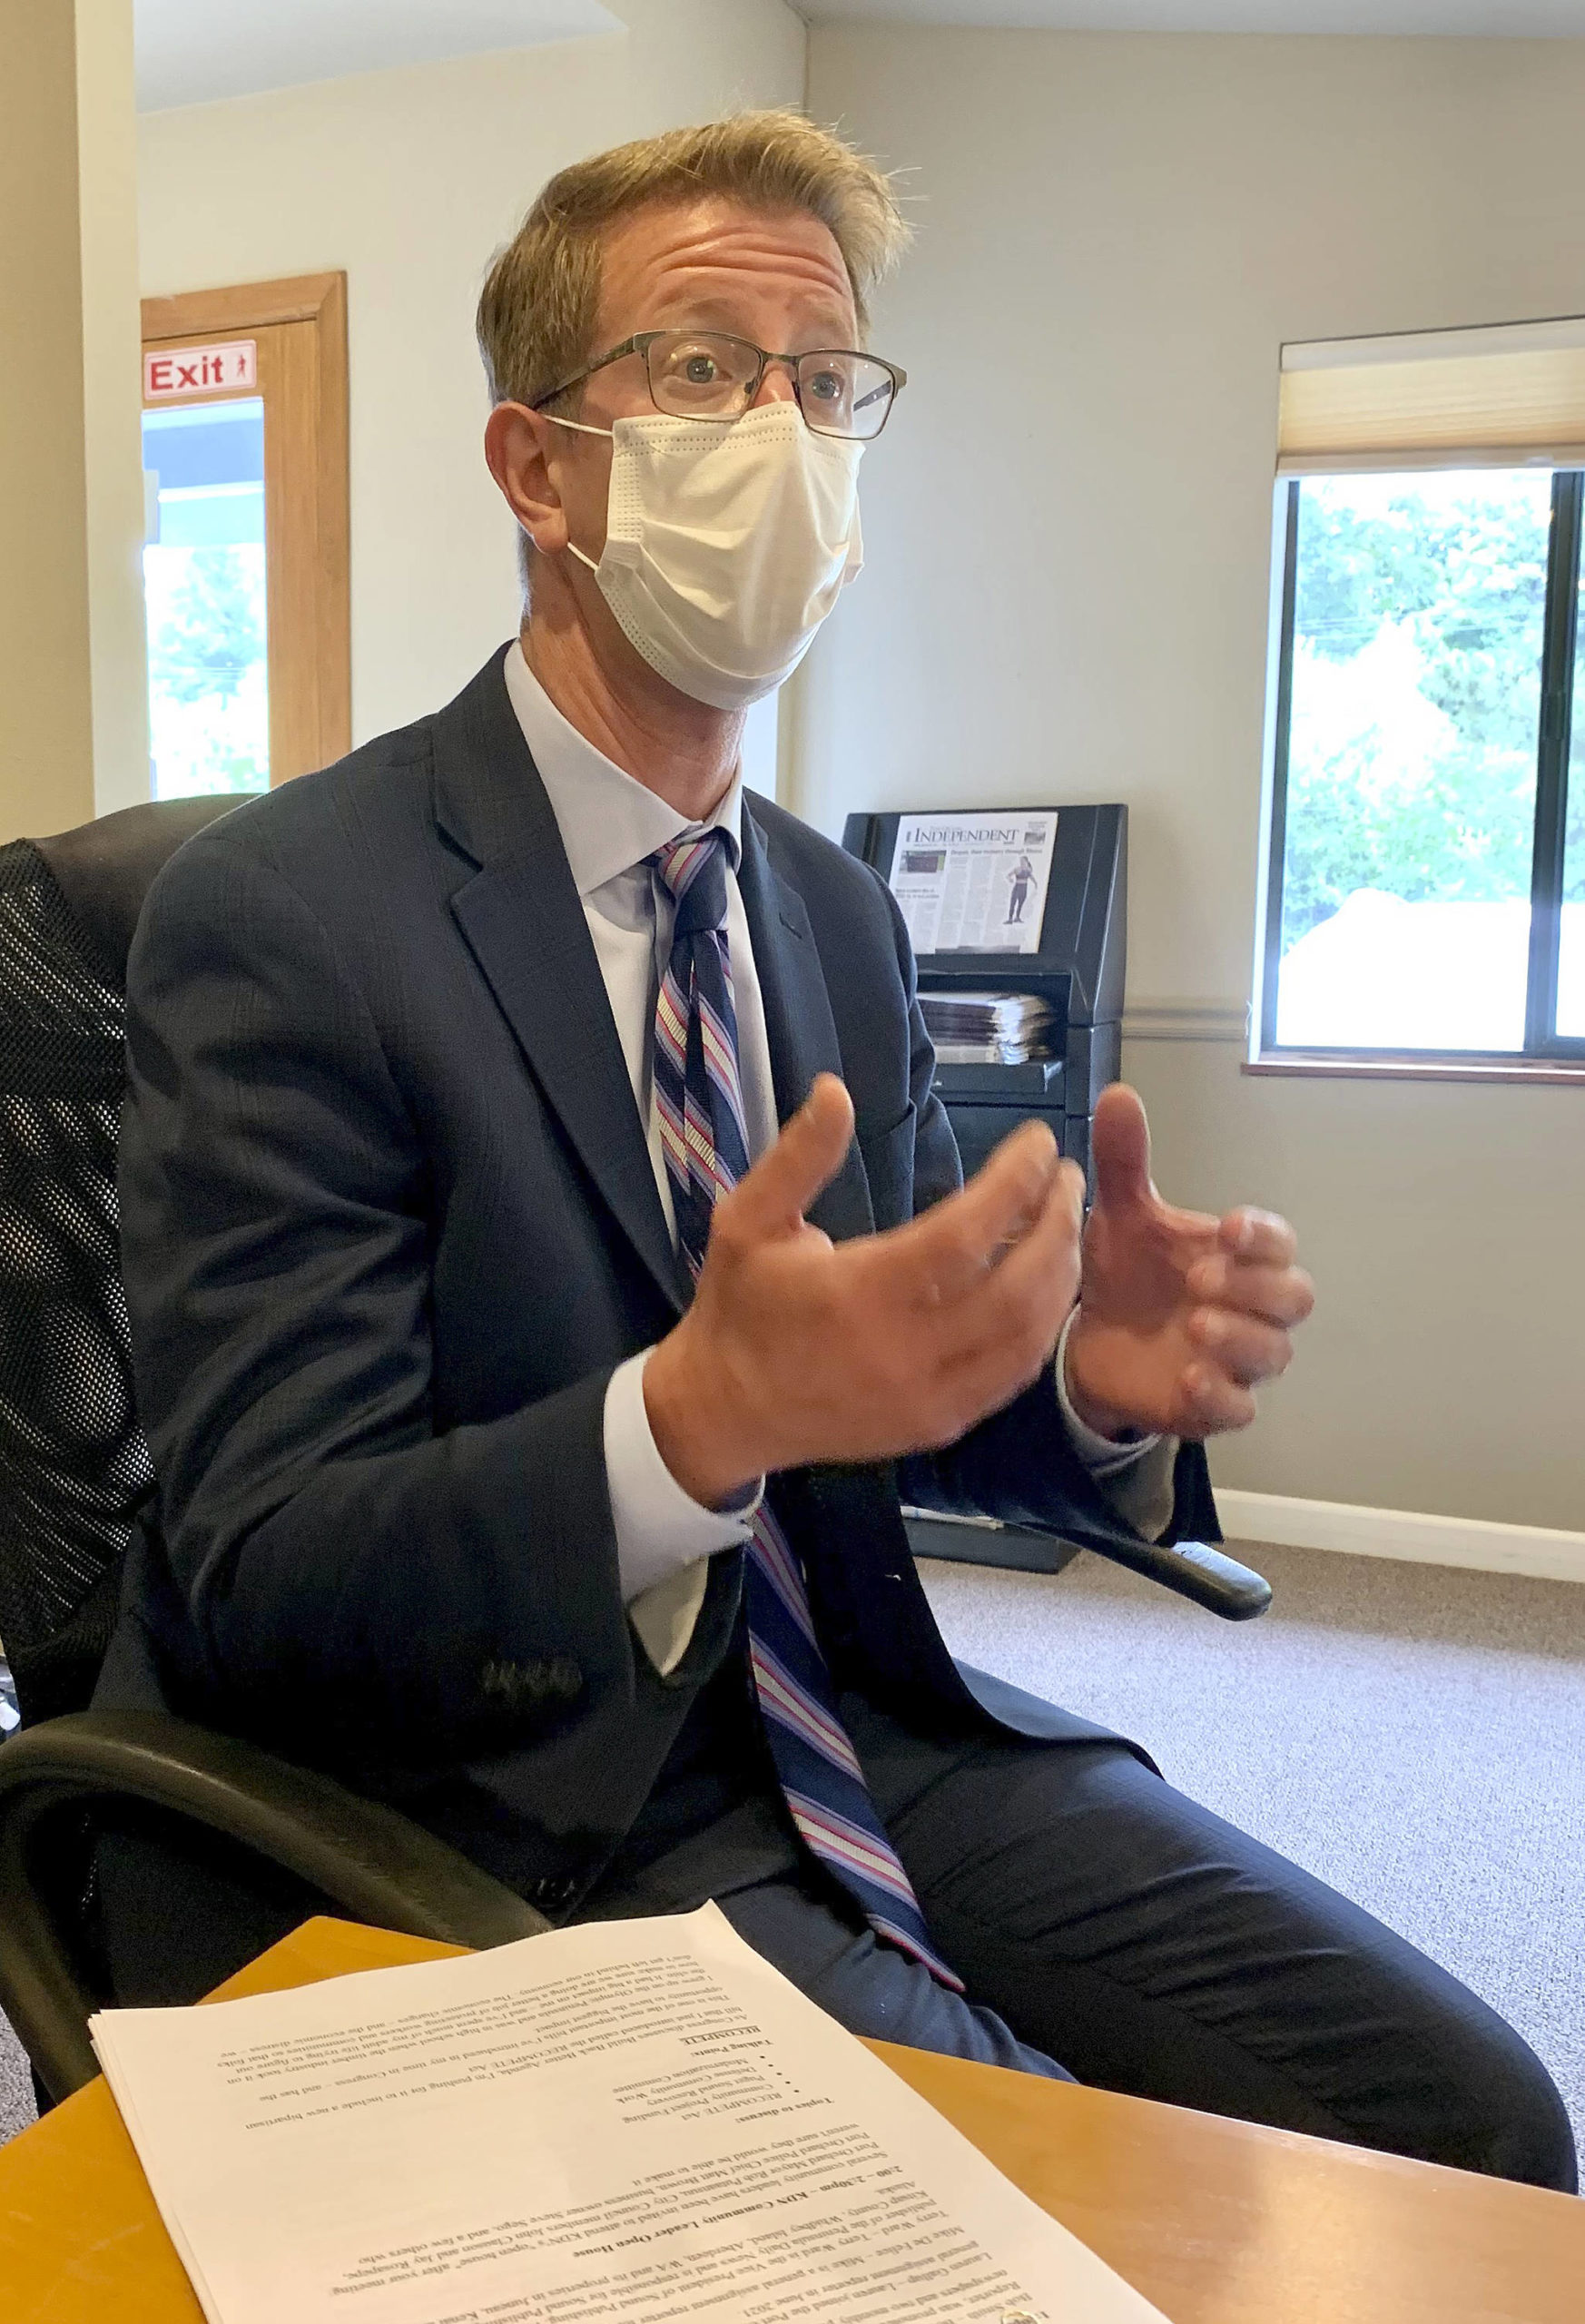 Bob Smith | Independent
U.S. Rep. Derek Kilmer spoke with reporters from the Port Orchard Independent and Kitsap Daily News about issues impacting communities on the Kitsap Peninsula.